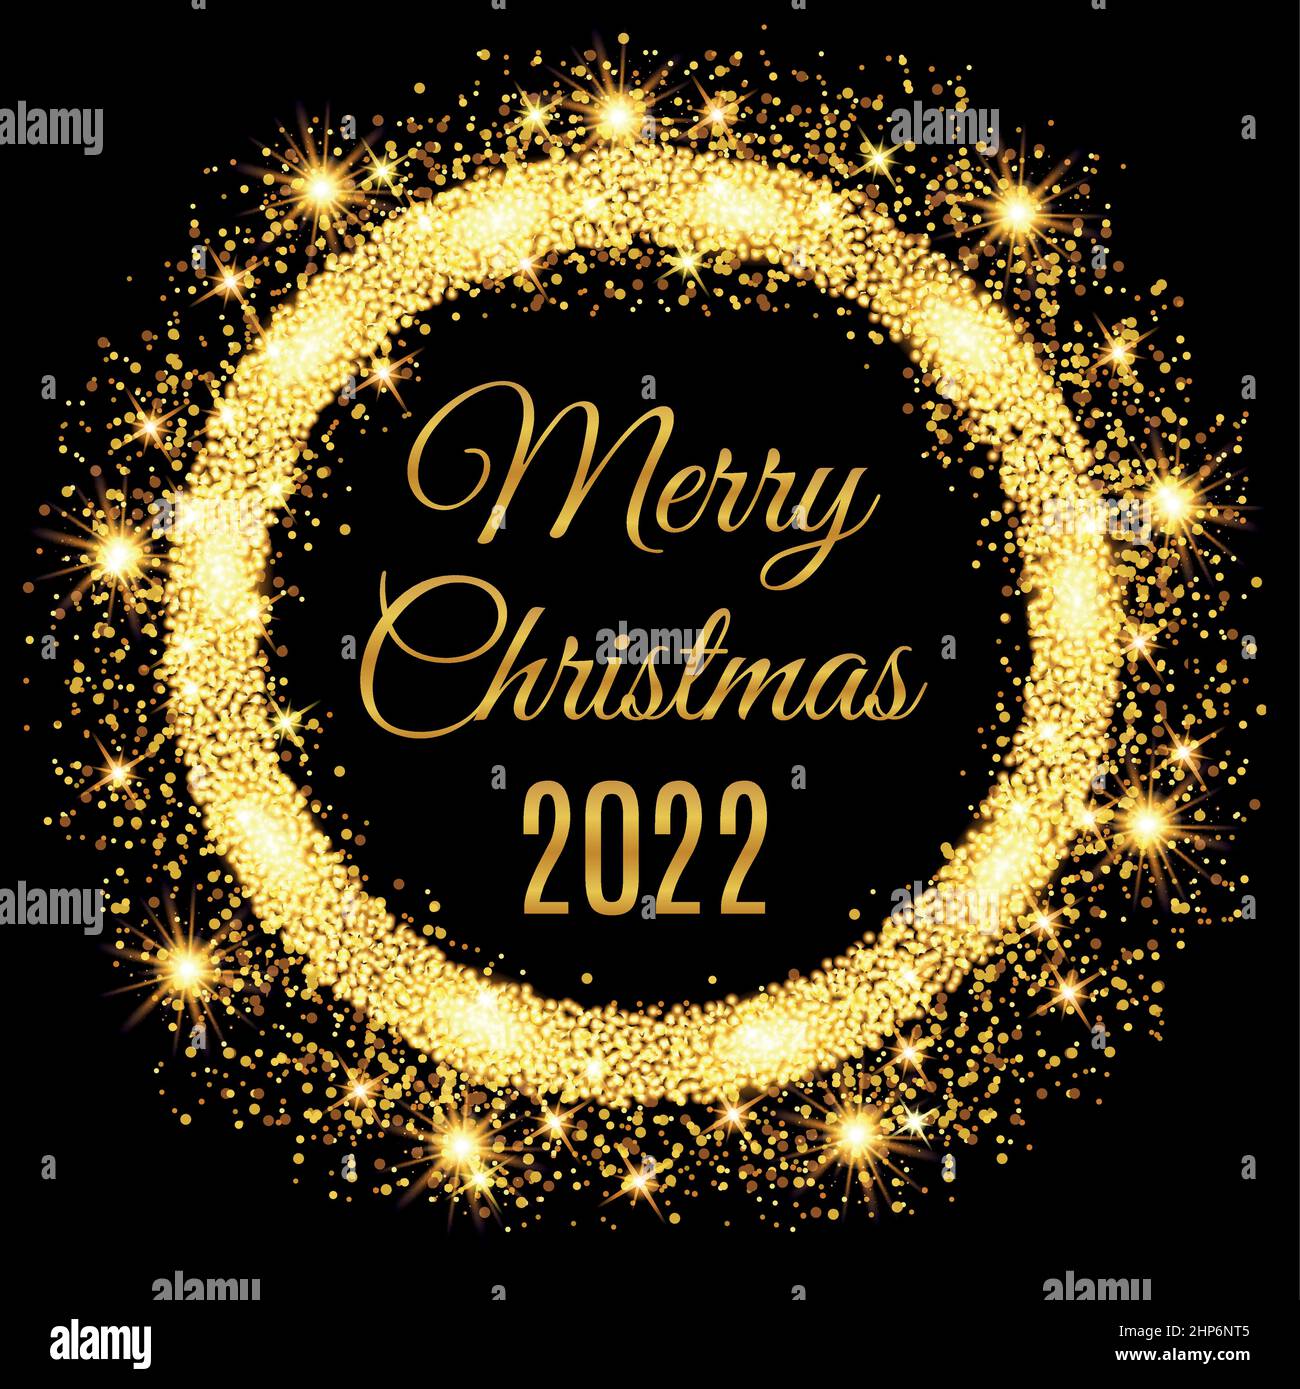 2022 Merry Christmas glowing gold background. Vector illustration Stock Vector